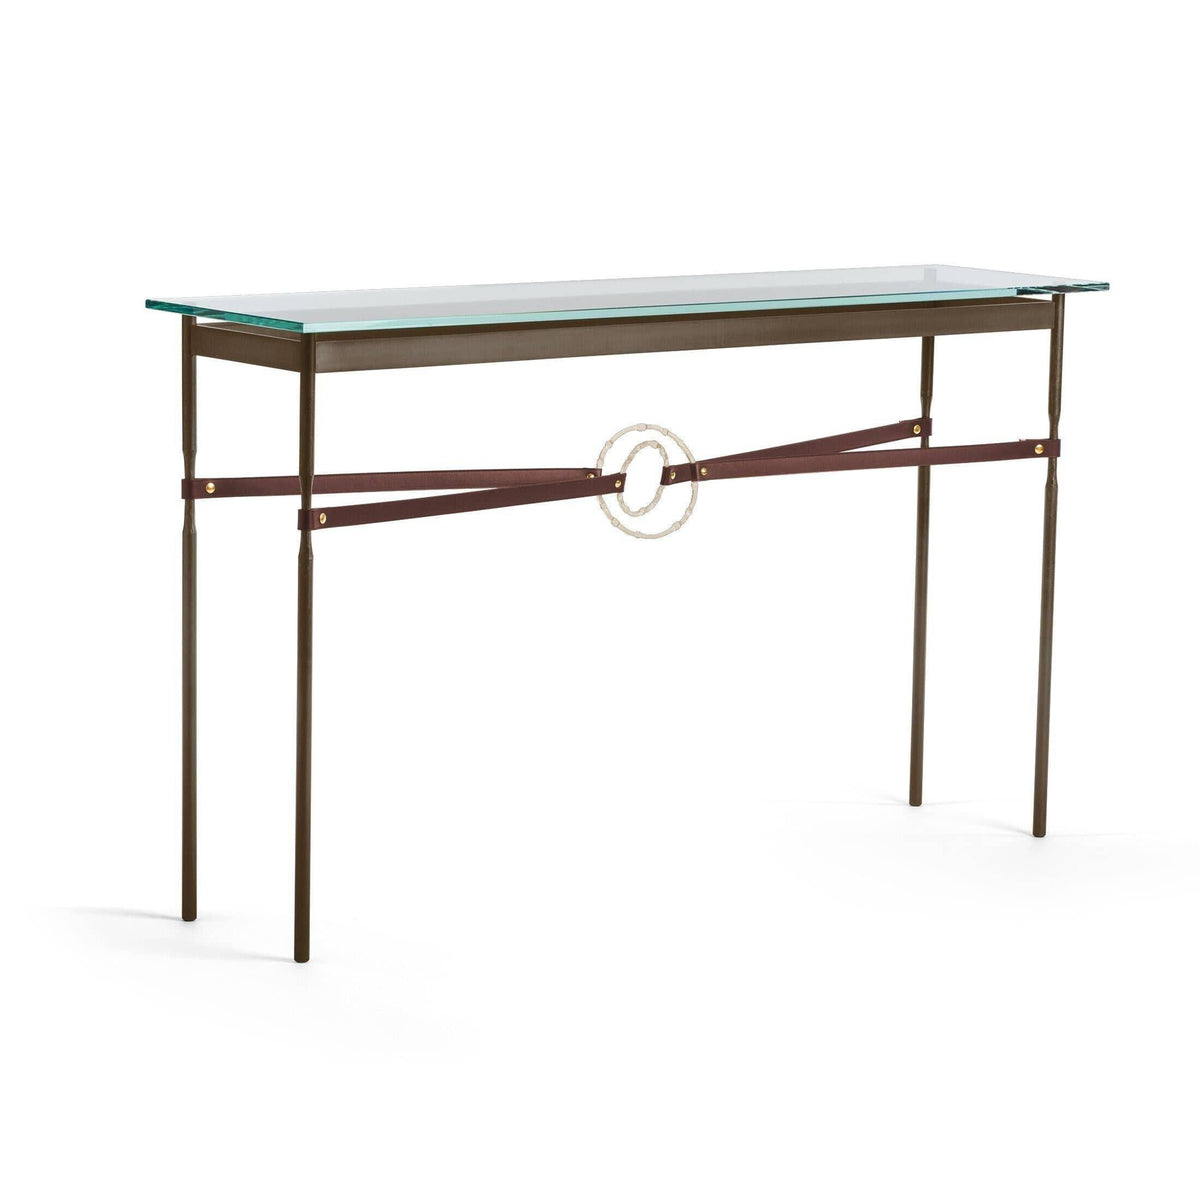 Hubbardton Forge - Equus Brown Leather Console Table - 750118-05-84-LB-VA0714 | Montreal Lighting & Hardware